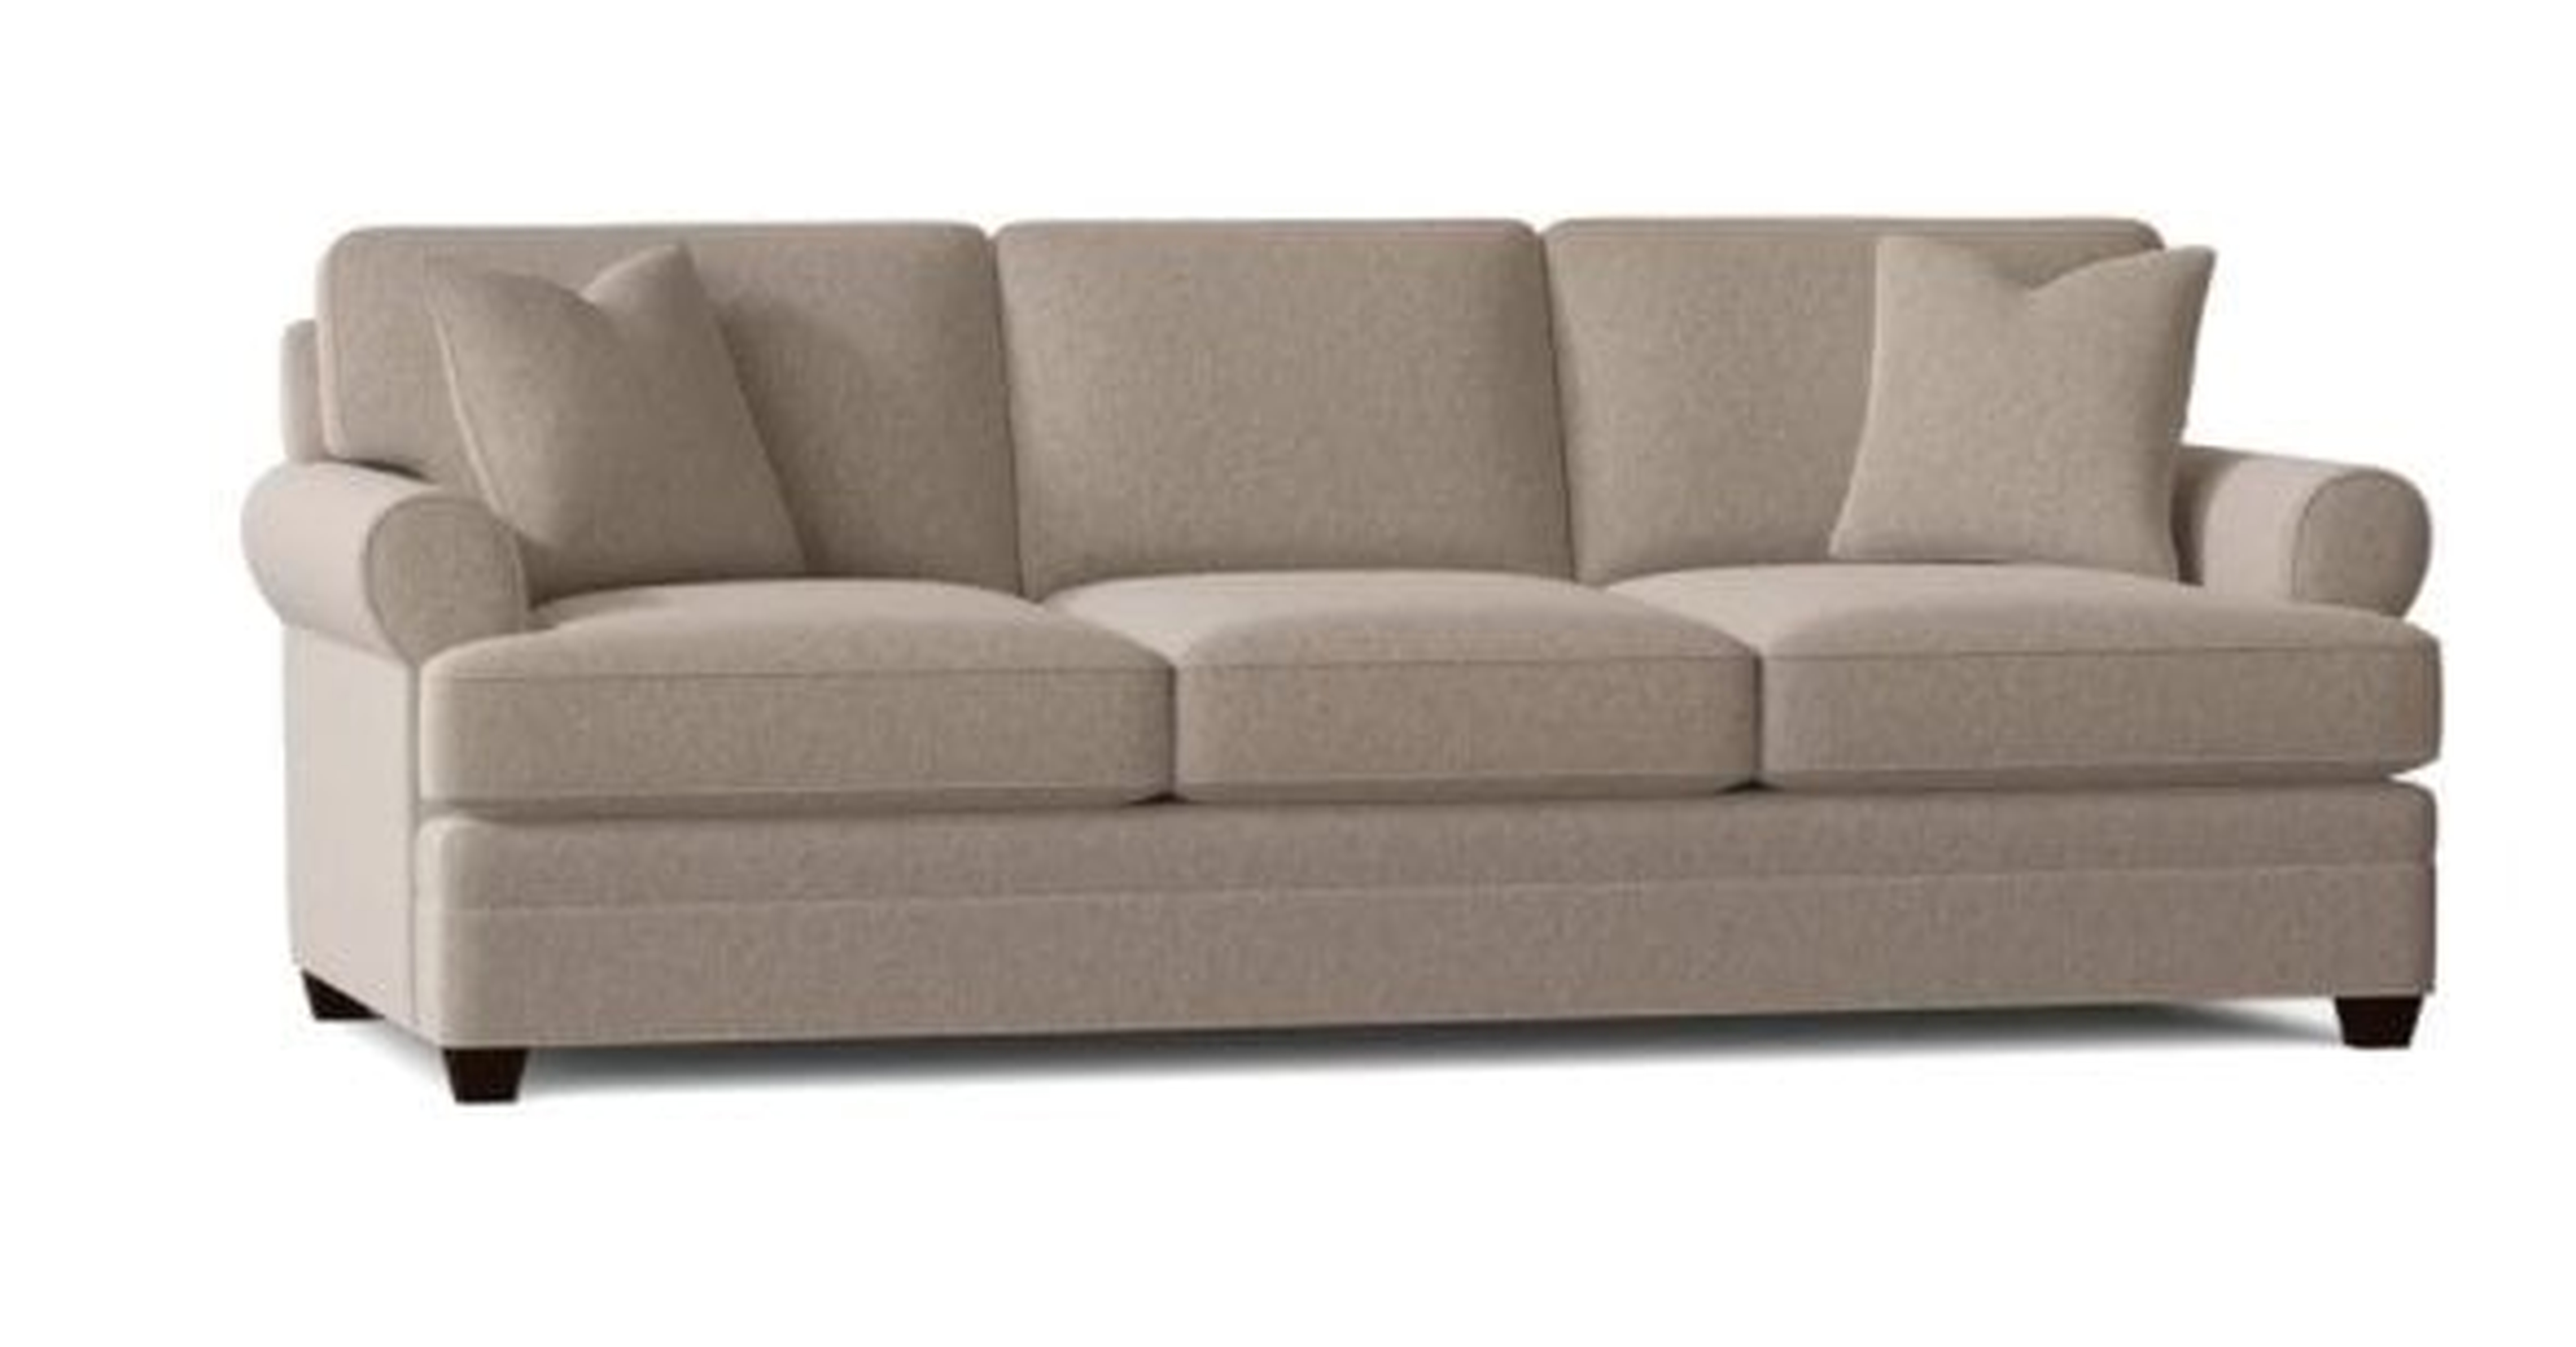 91" Rolled Arm Sofa with Reversible Cushions - Wayfair